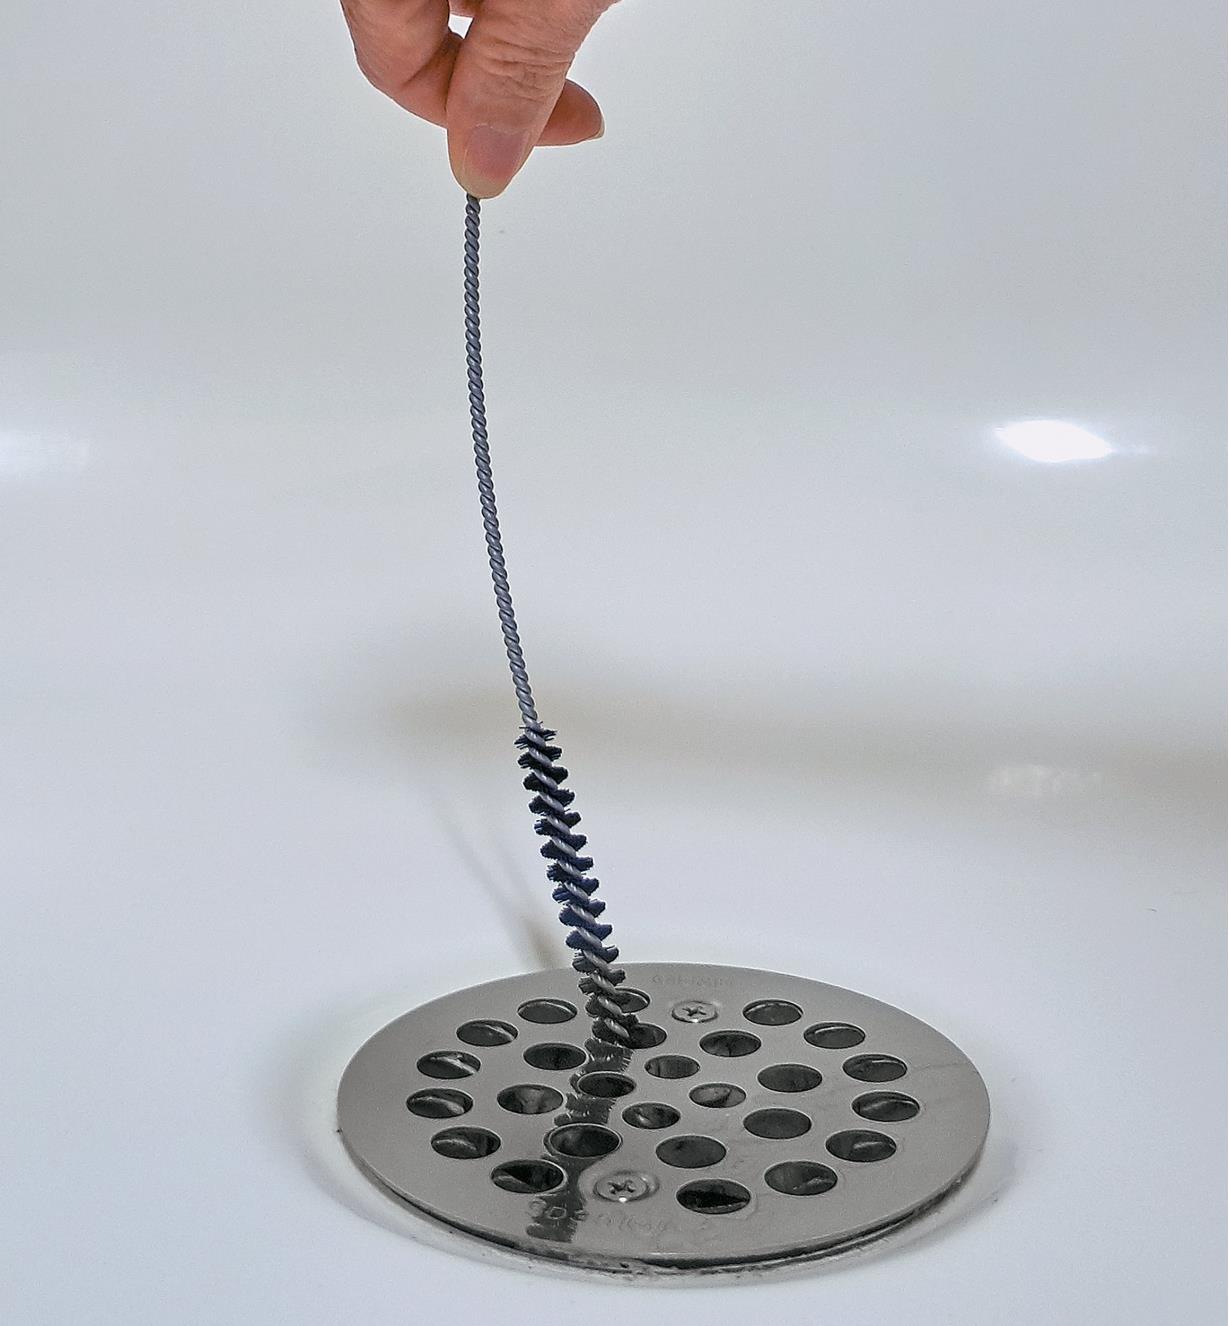 The drain-cleaning brush being inserted into a shower drain cover